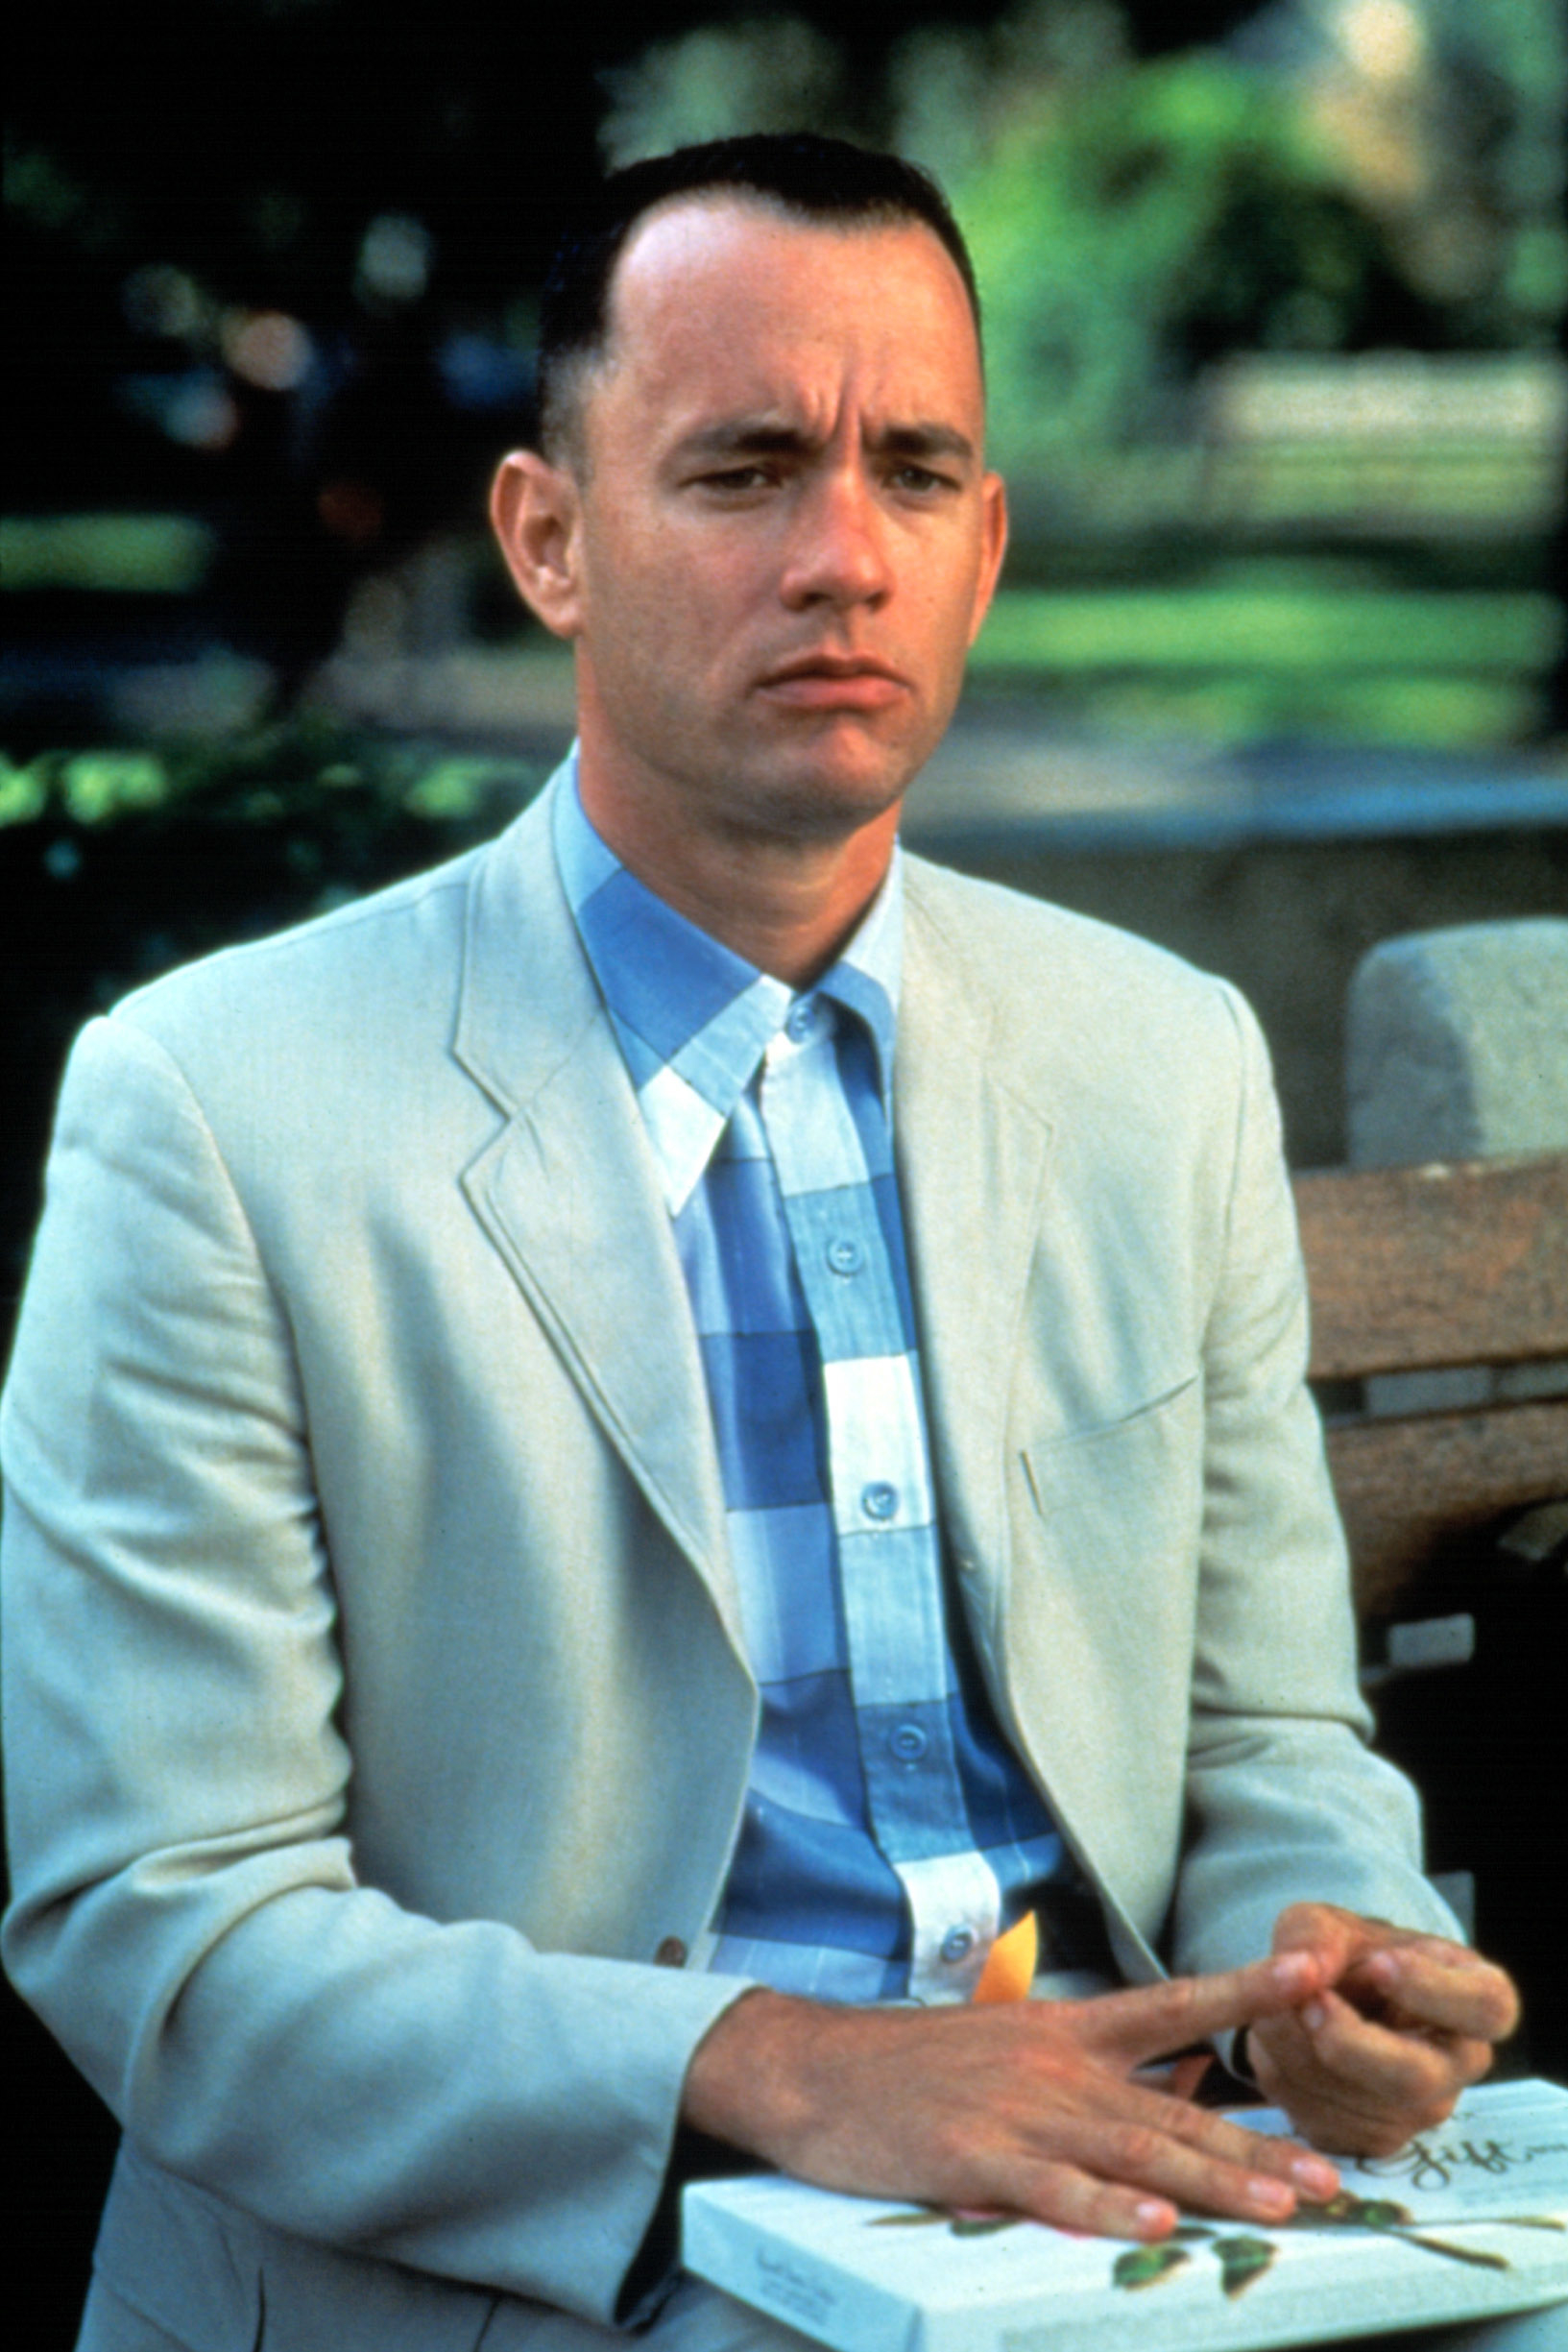 Tom Hanks as Forrest Gump, seated on a bench, wearing a light suit and plaid shirt, holding a briefcase